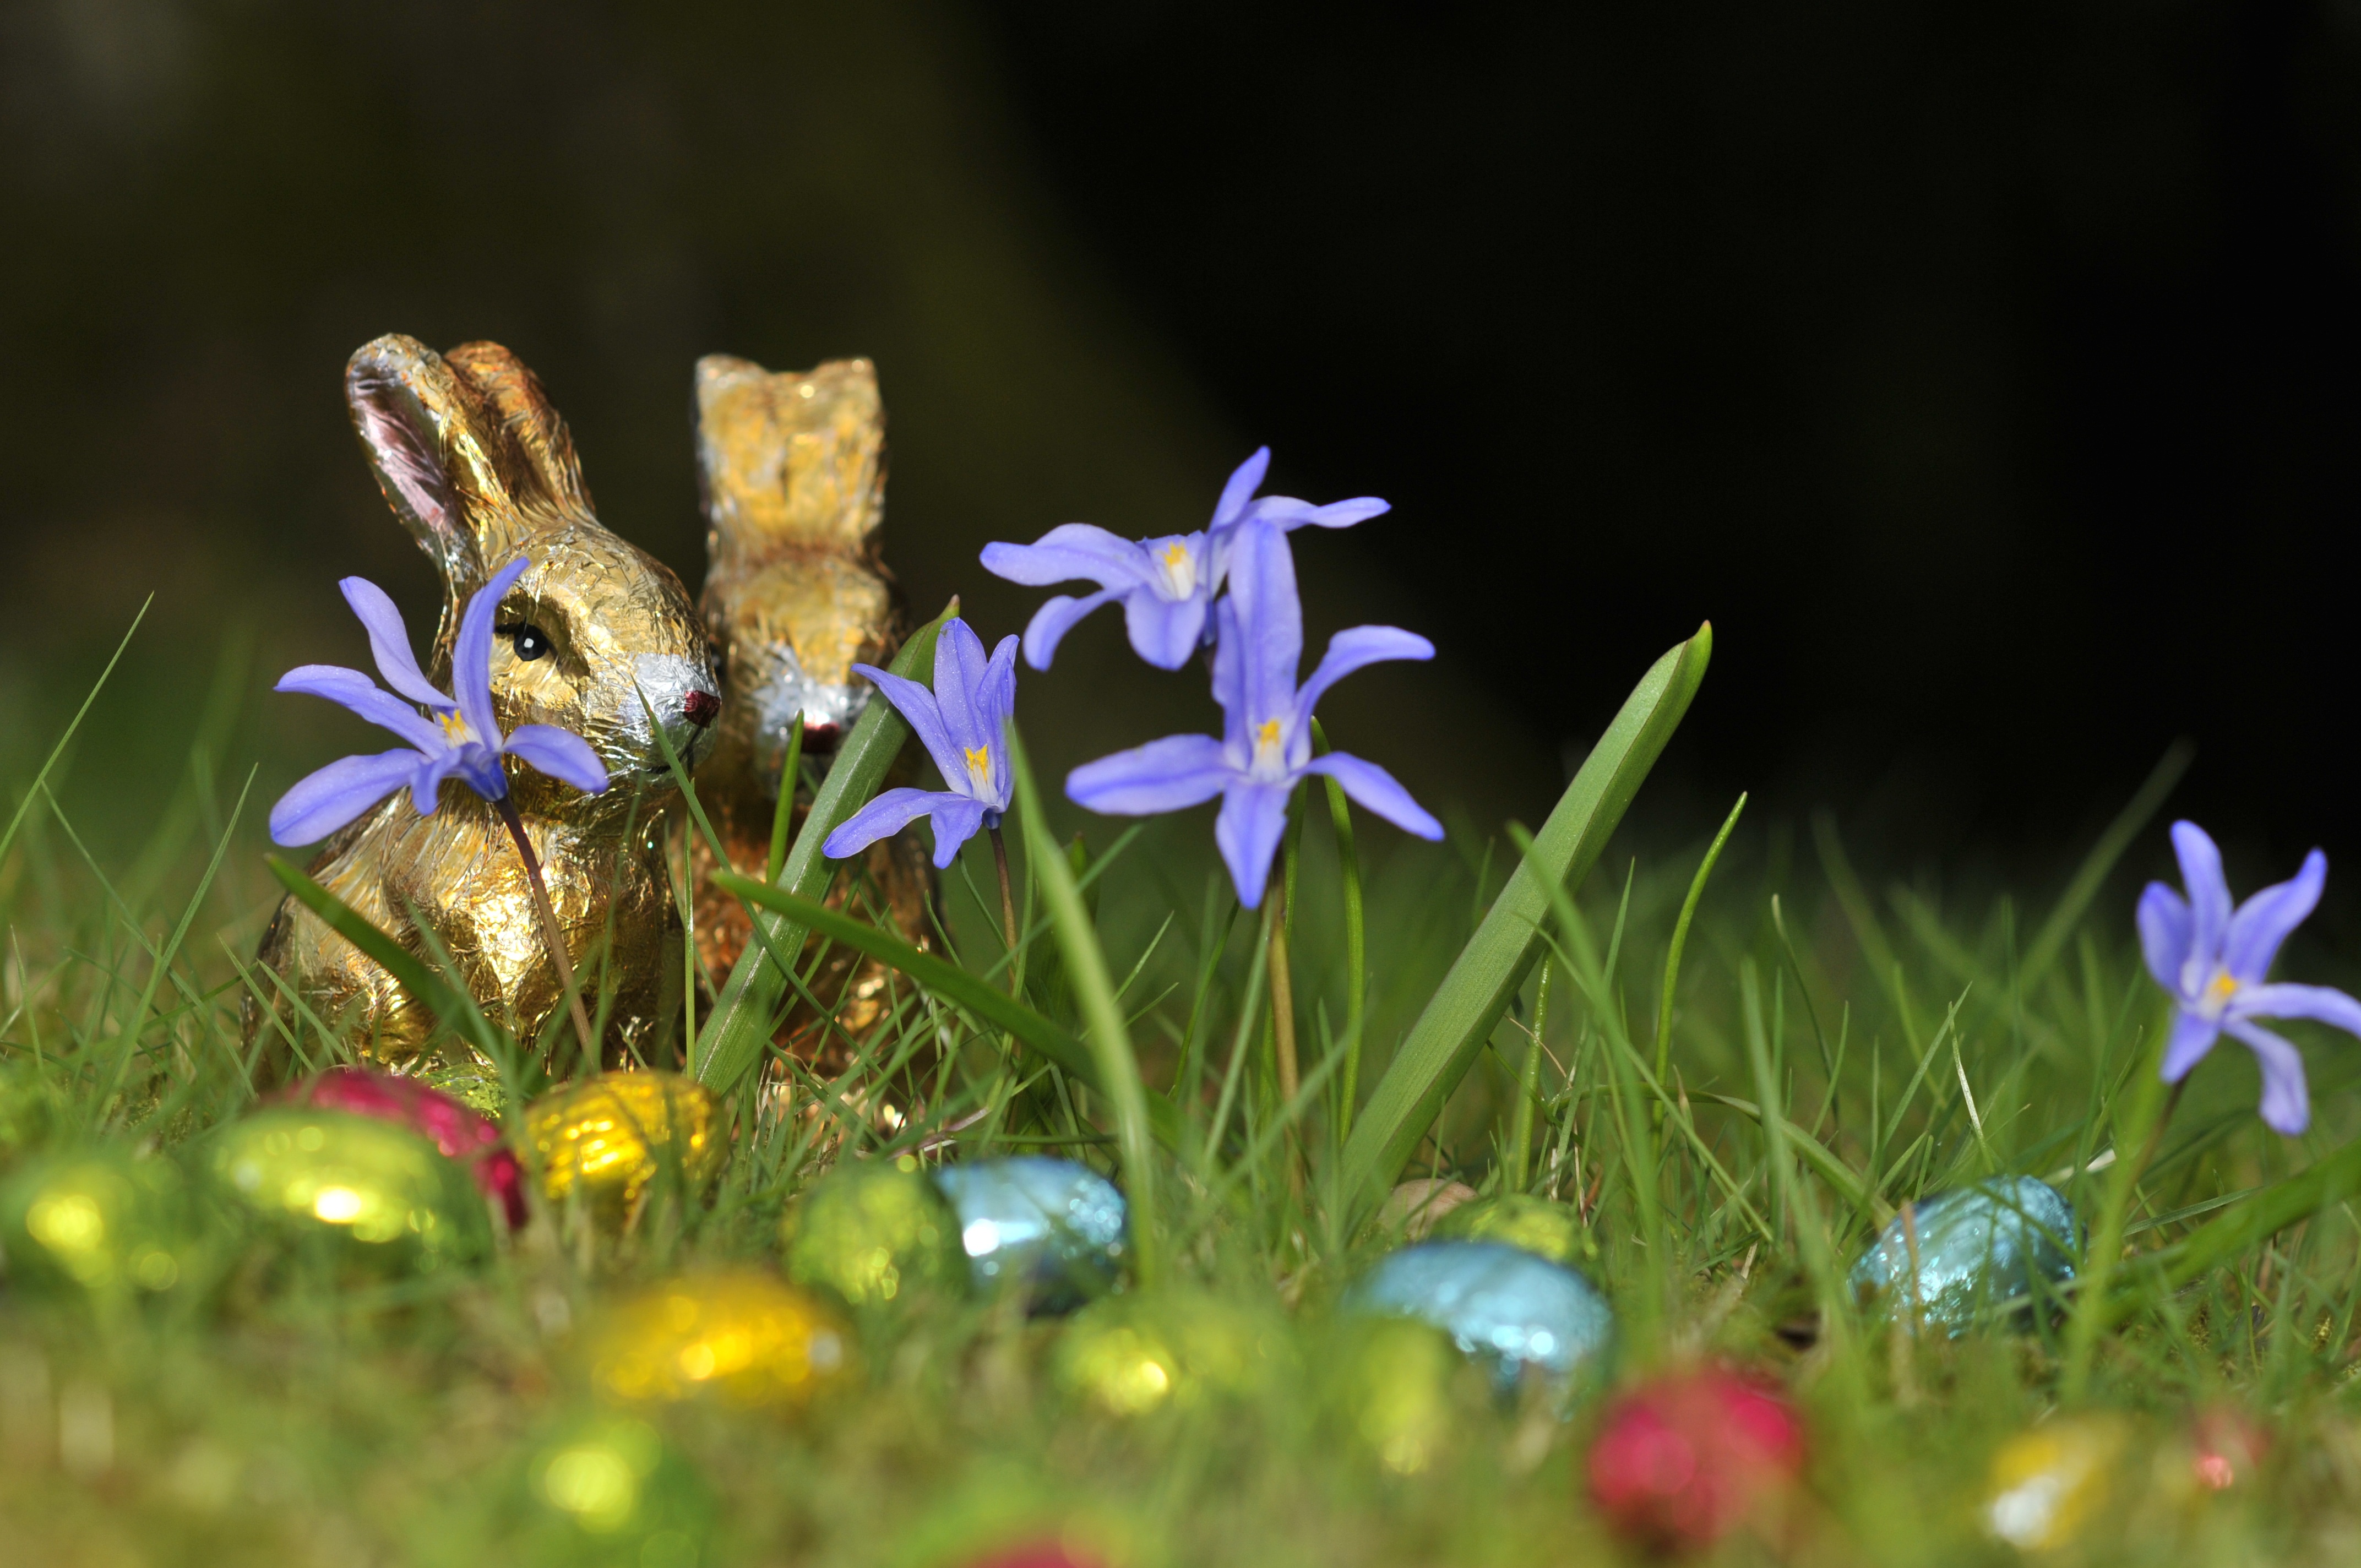 holidays, flowers, grass, eggs, easter, chocolate bunnies, chocolate hares Full HD